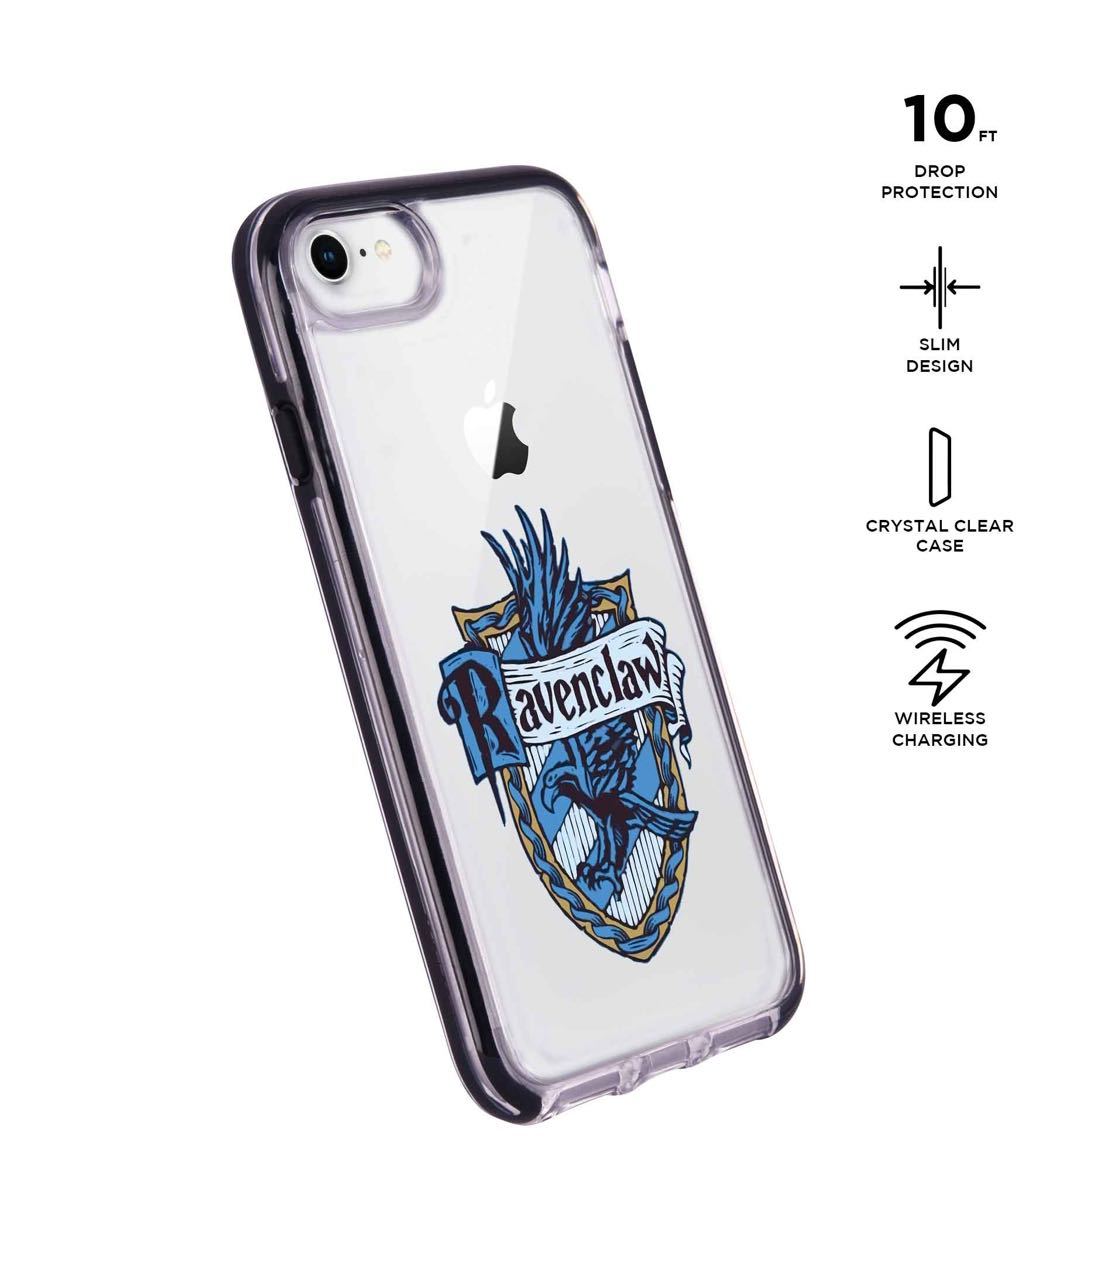 Crest Ravenclaw - Extreme Phone Case for iPhone 8